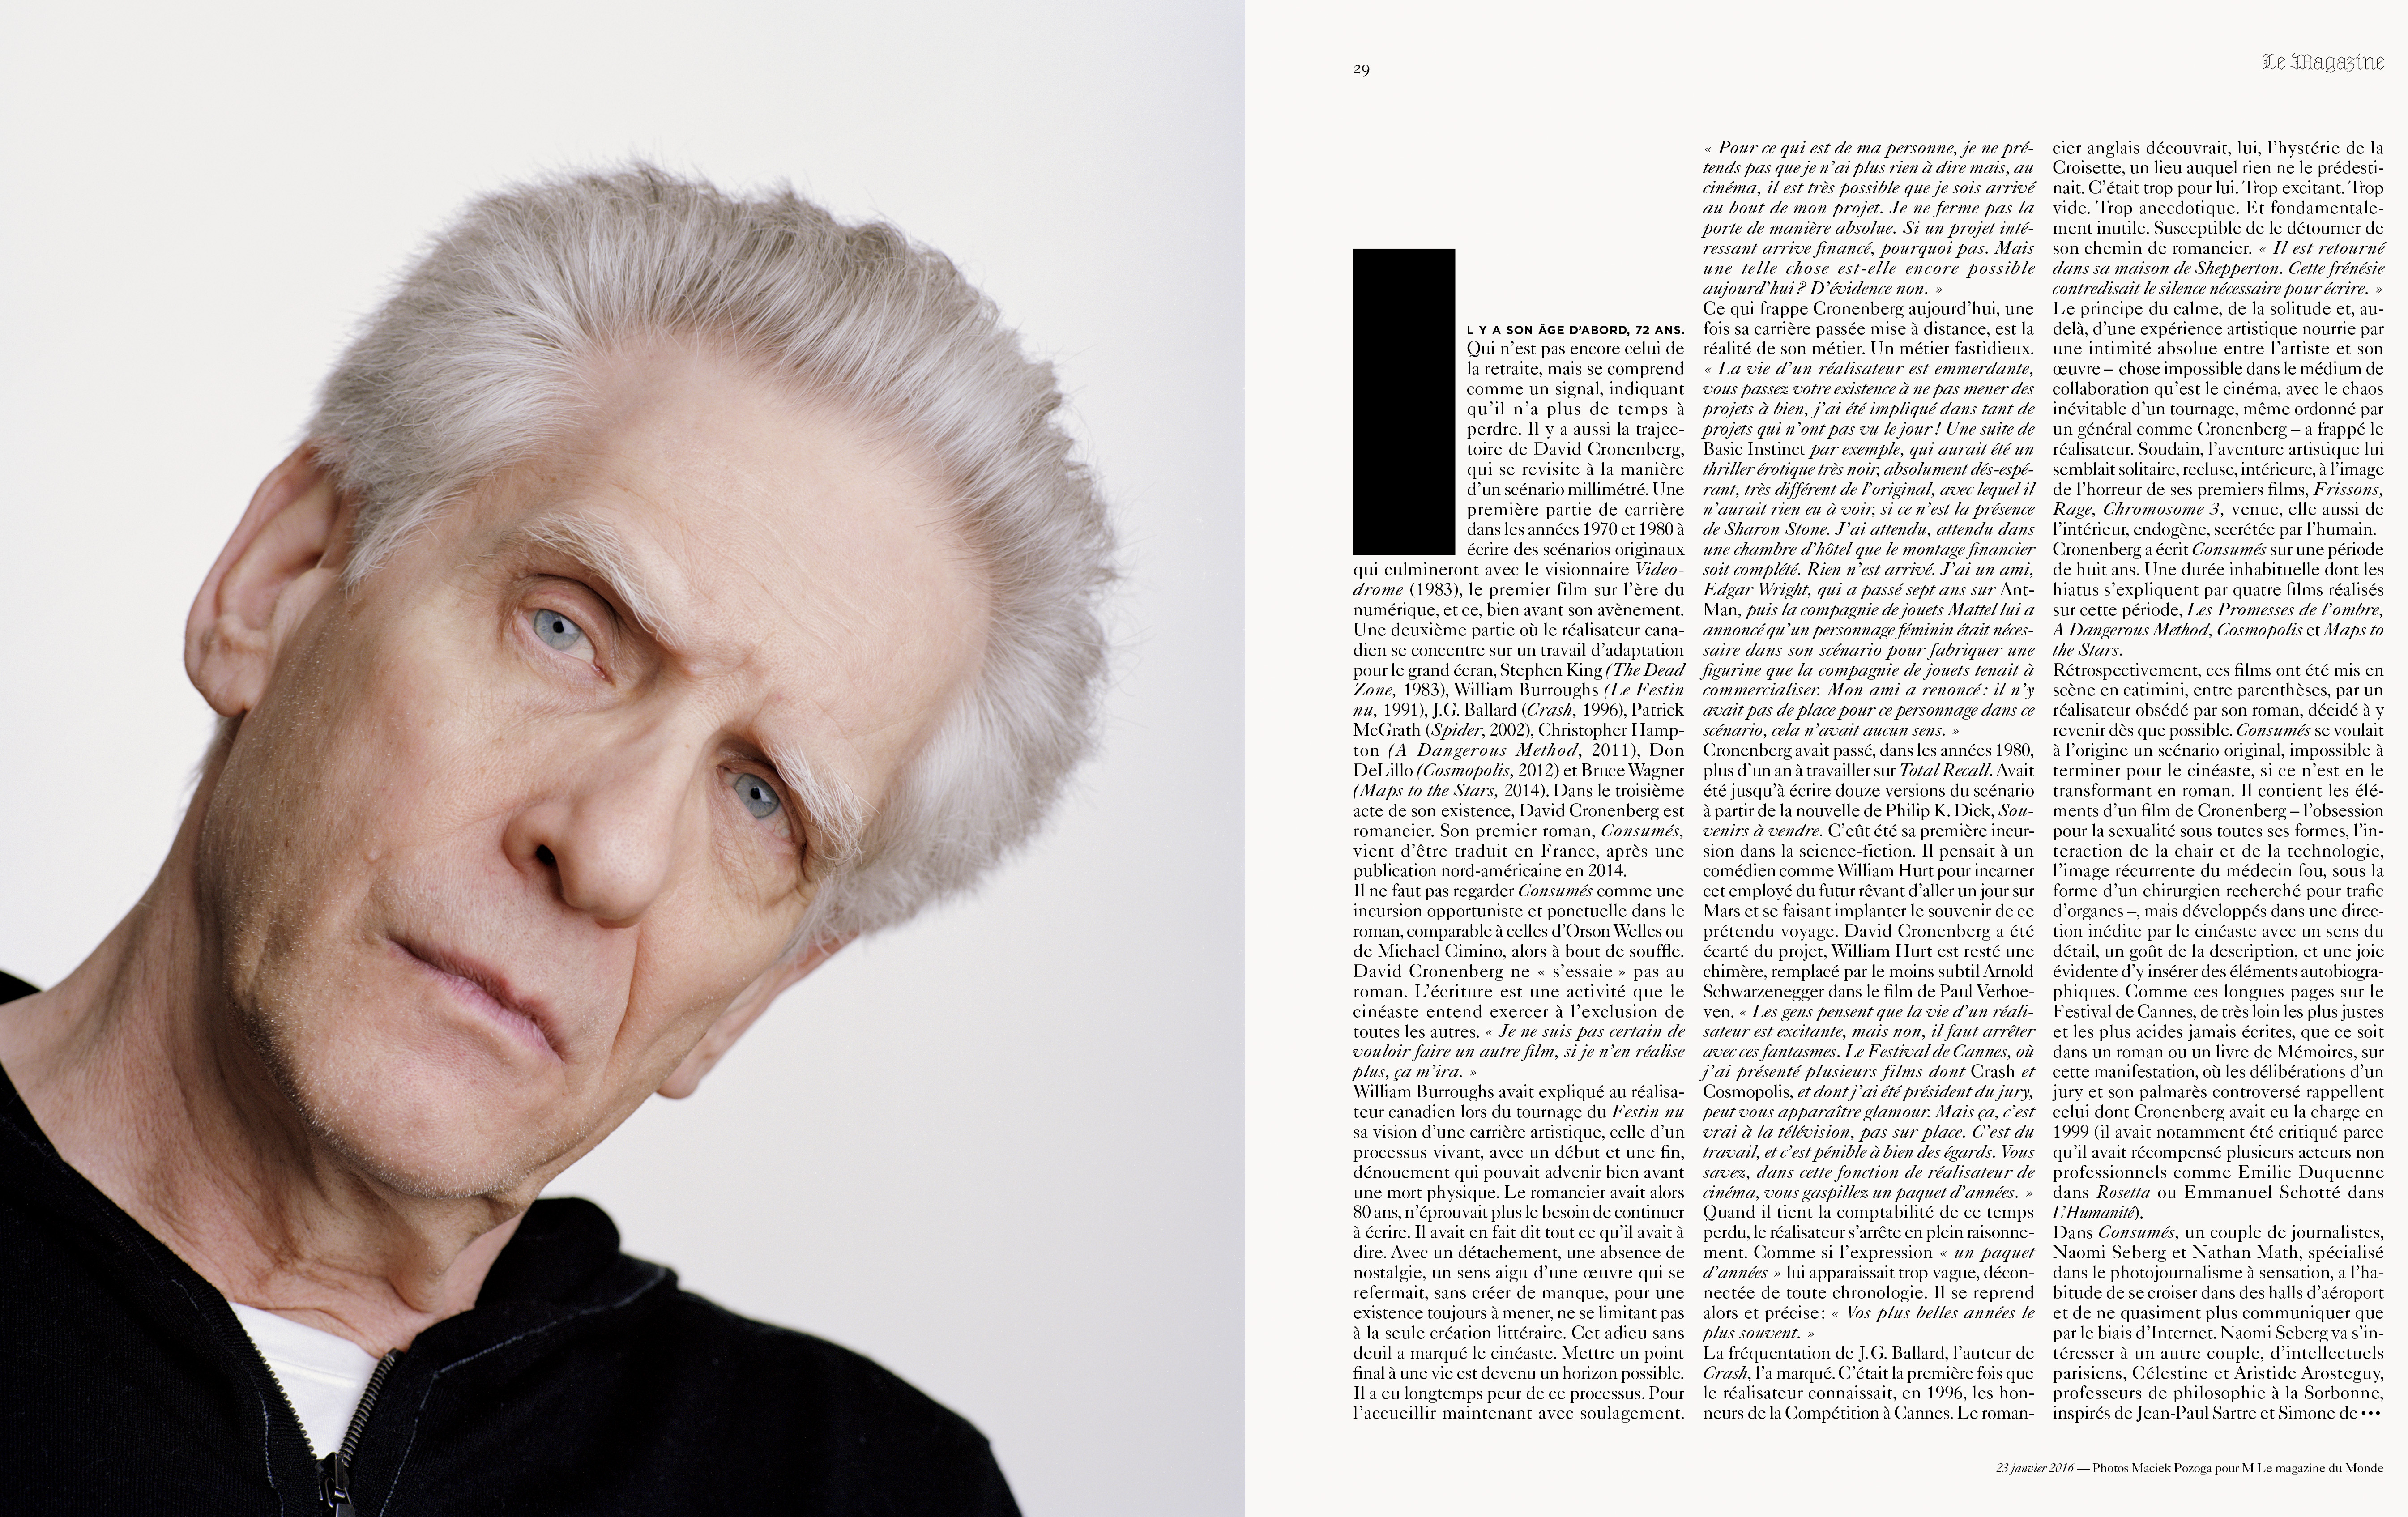 I photographed this portrait of David Cronenberg for *M le Magazine du Monde*. I was using the longest lens possible, and his expression translates the fact that he was not hearing us very well as we were about six meters away from him.  *{Photo assistant: François Briens}* - © Maciek Pożoga